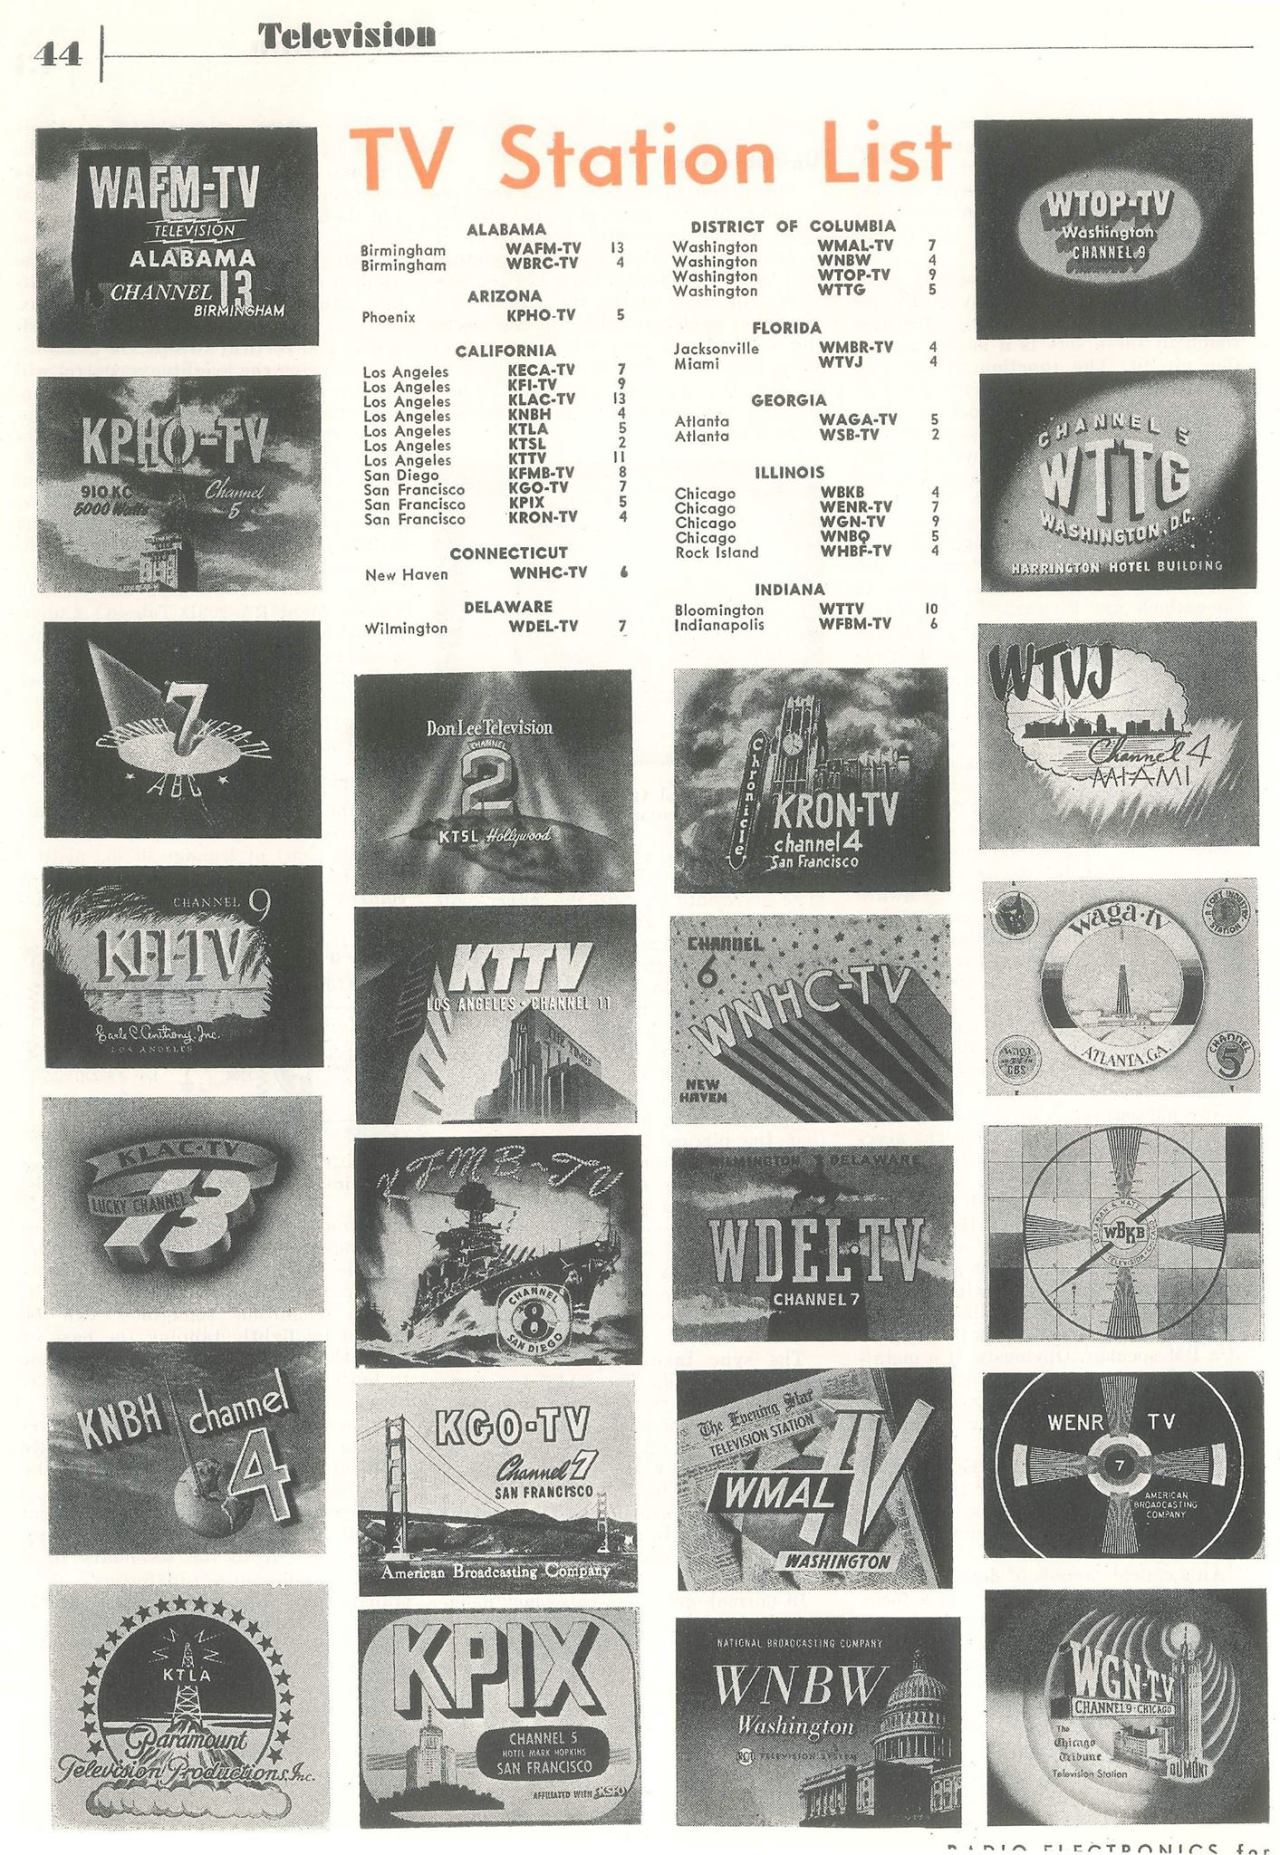 'TV Station List' - page 1 of 4 - published in Radio-Electronics - January 1951